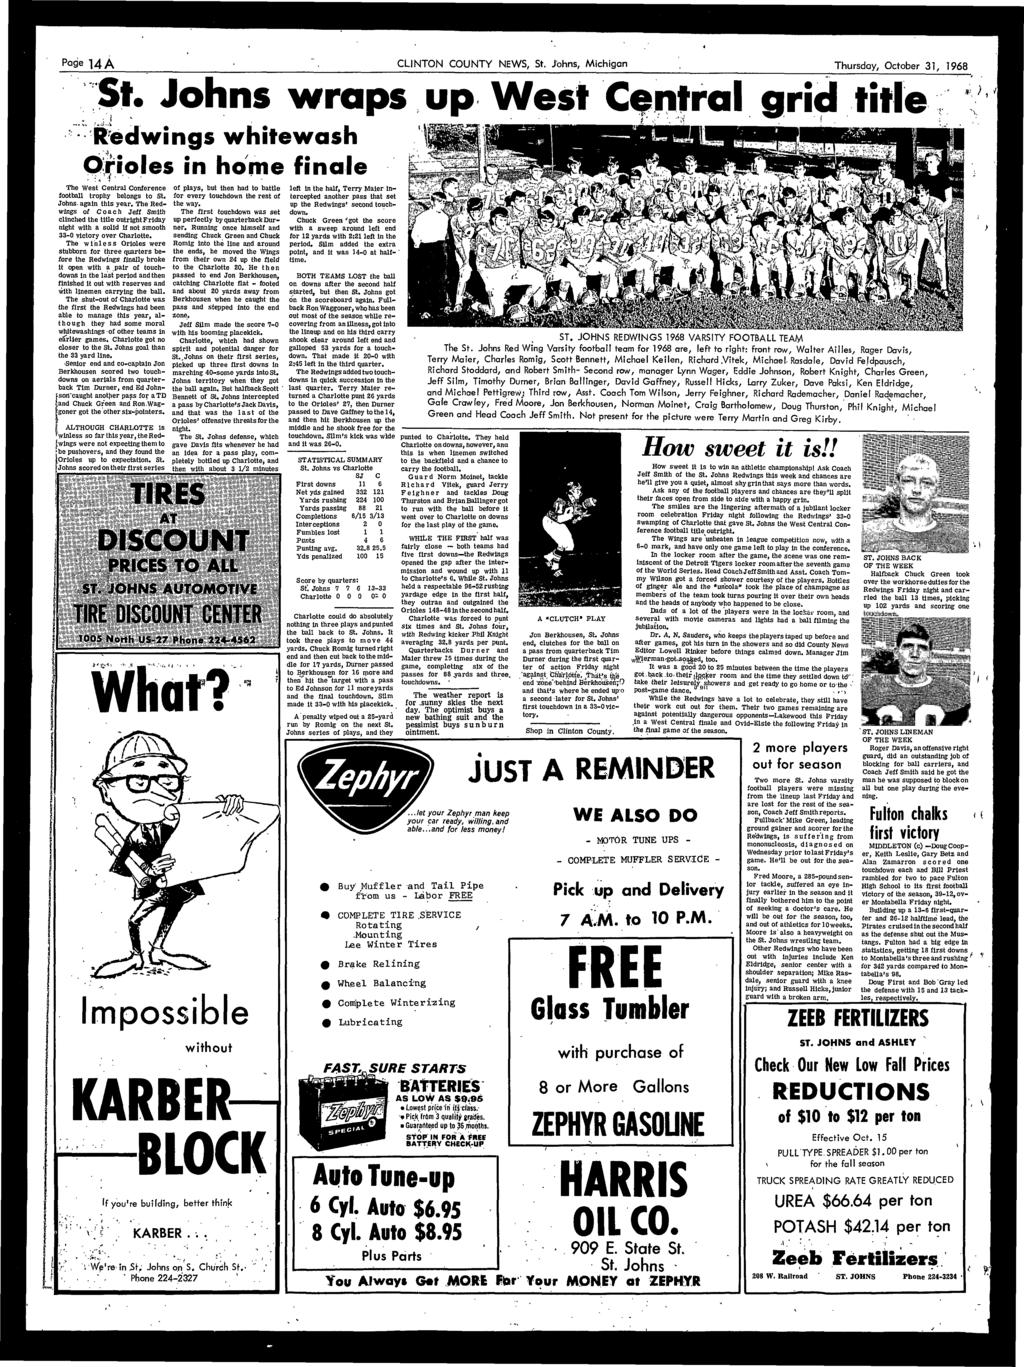 Page ]4A CLINTON COUNTY NEWS, St. Johns, Mchgan Thursday, October 31, 1968 St. Johns wraps Redwngs whtewash Oroles n home fnale.